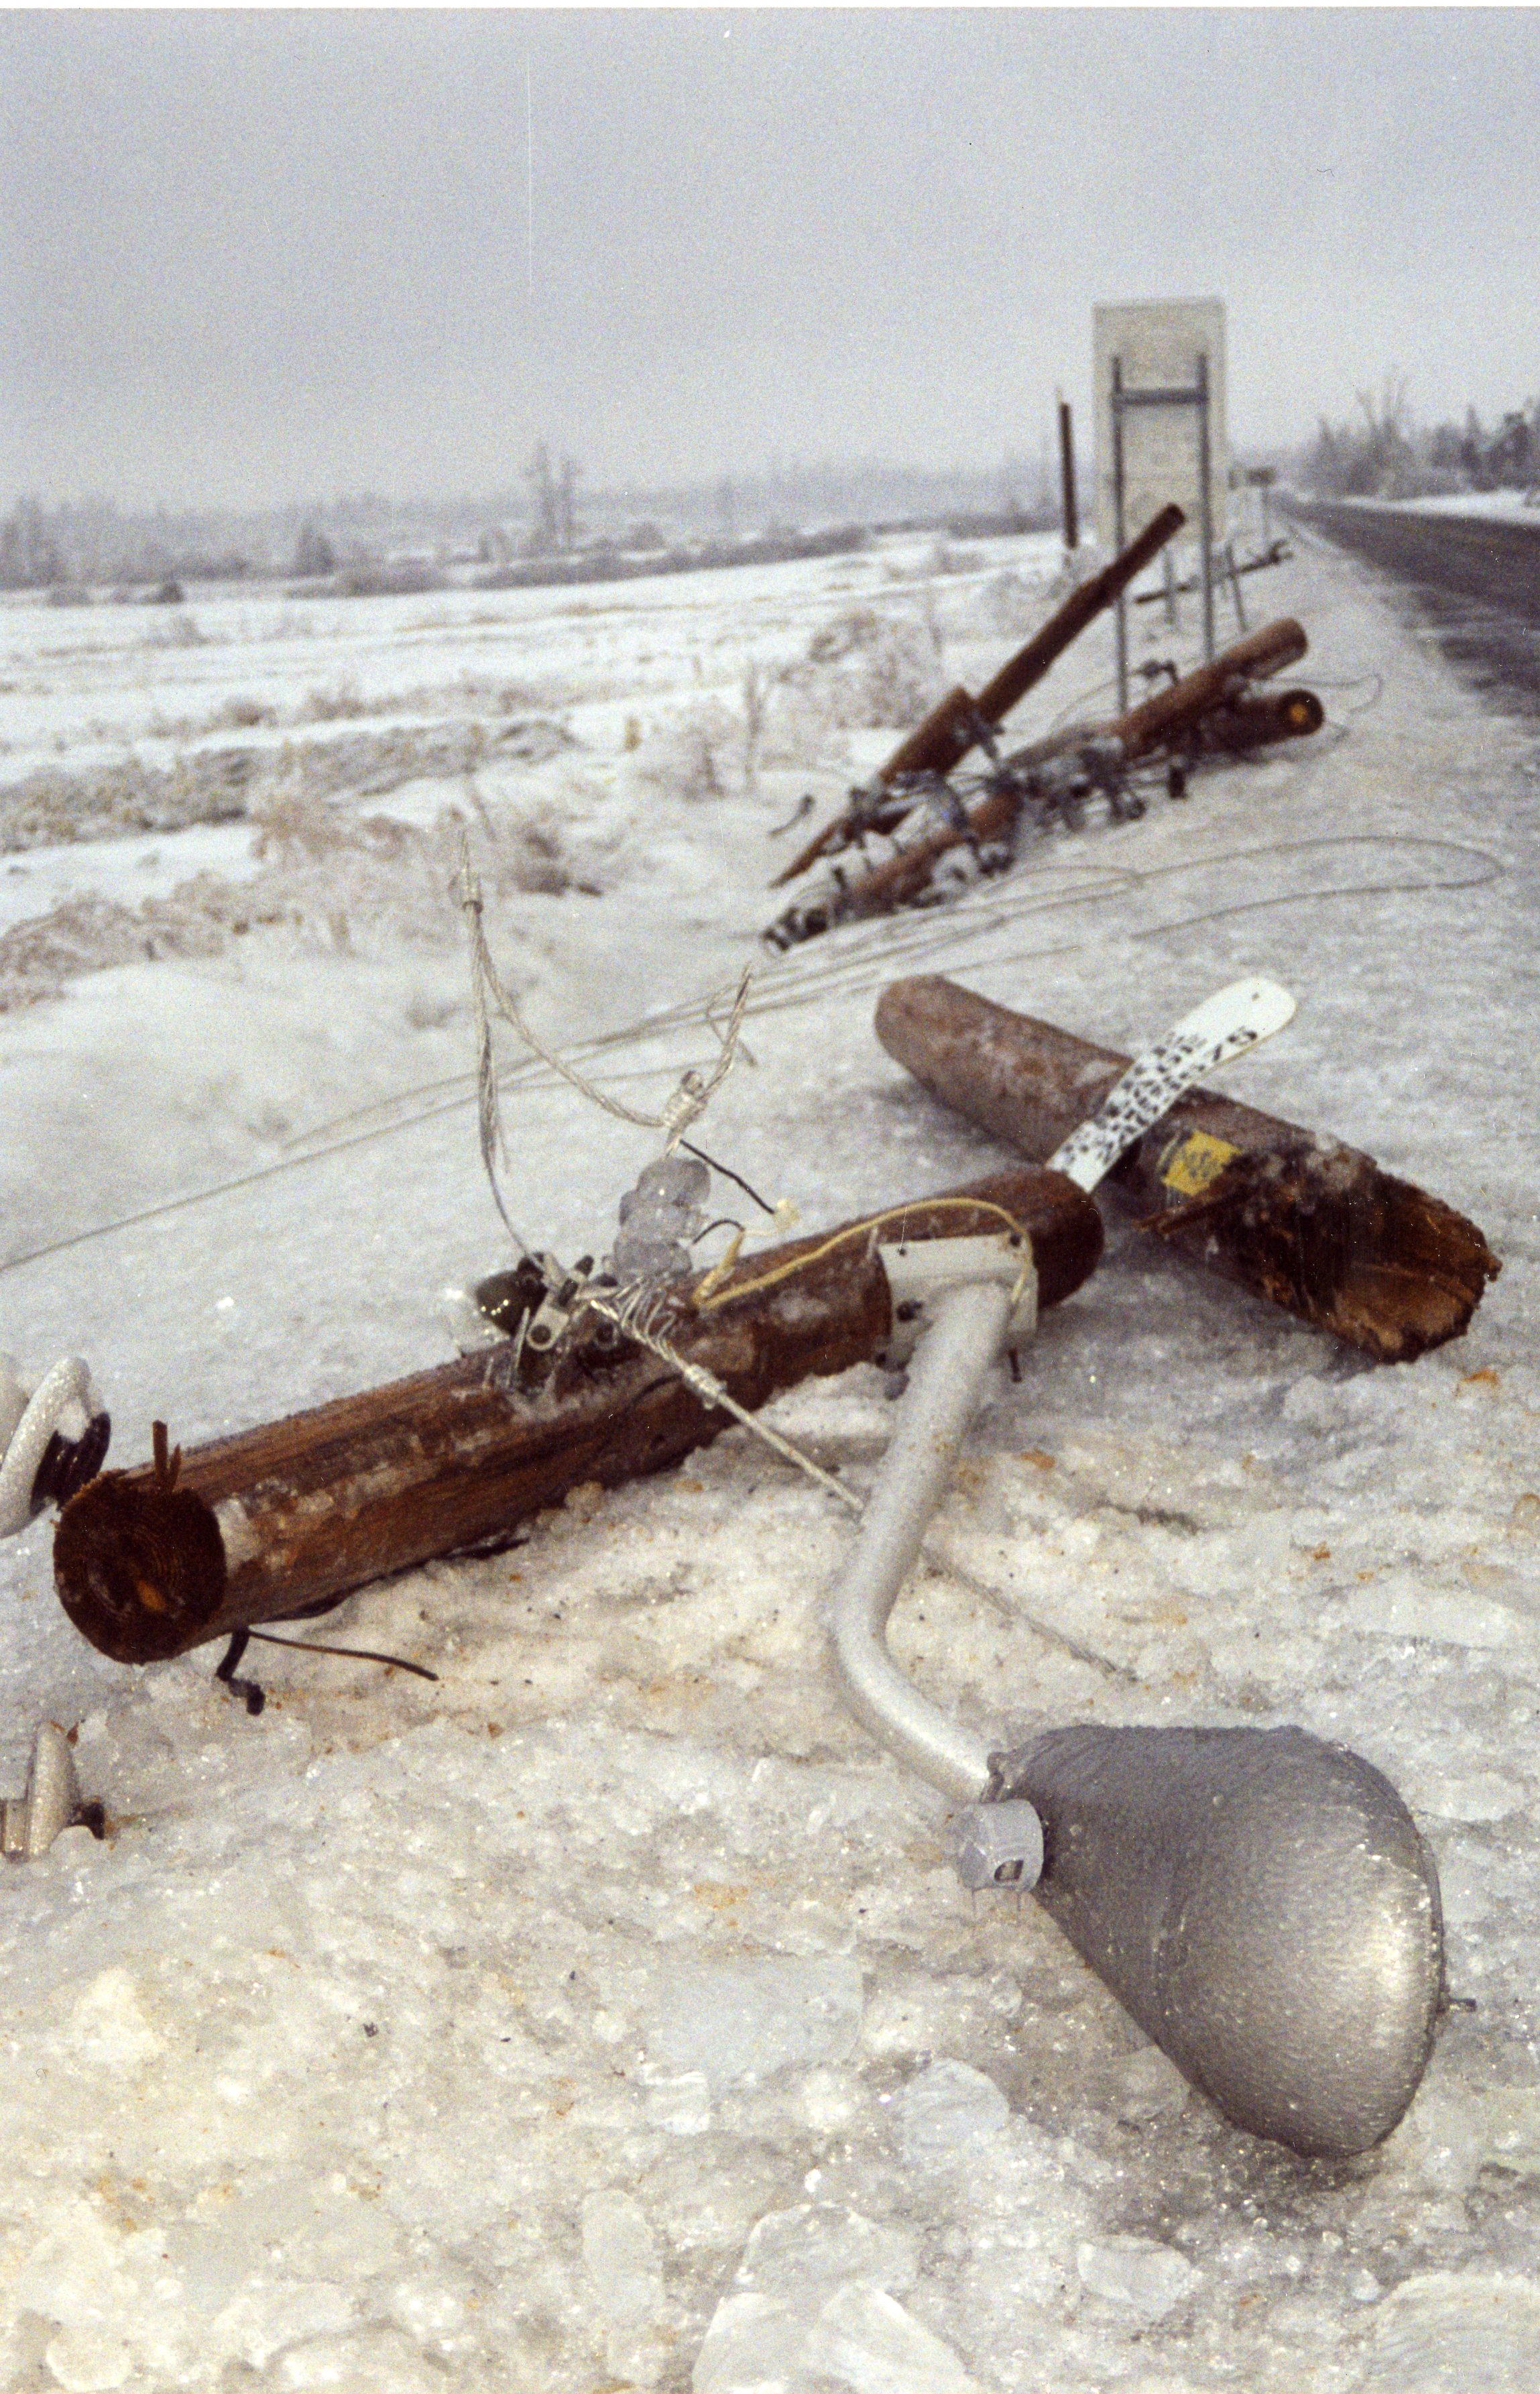 A streetlamp attached to a eletrical pole gaveway and broke underweight of the ice.